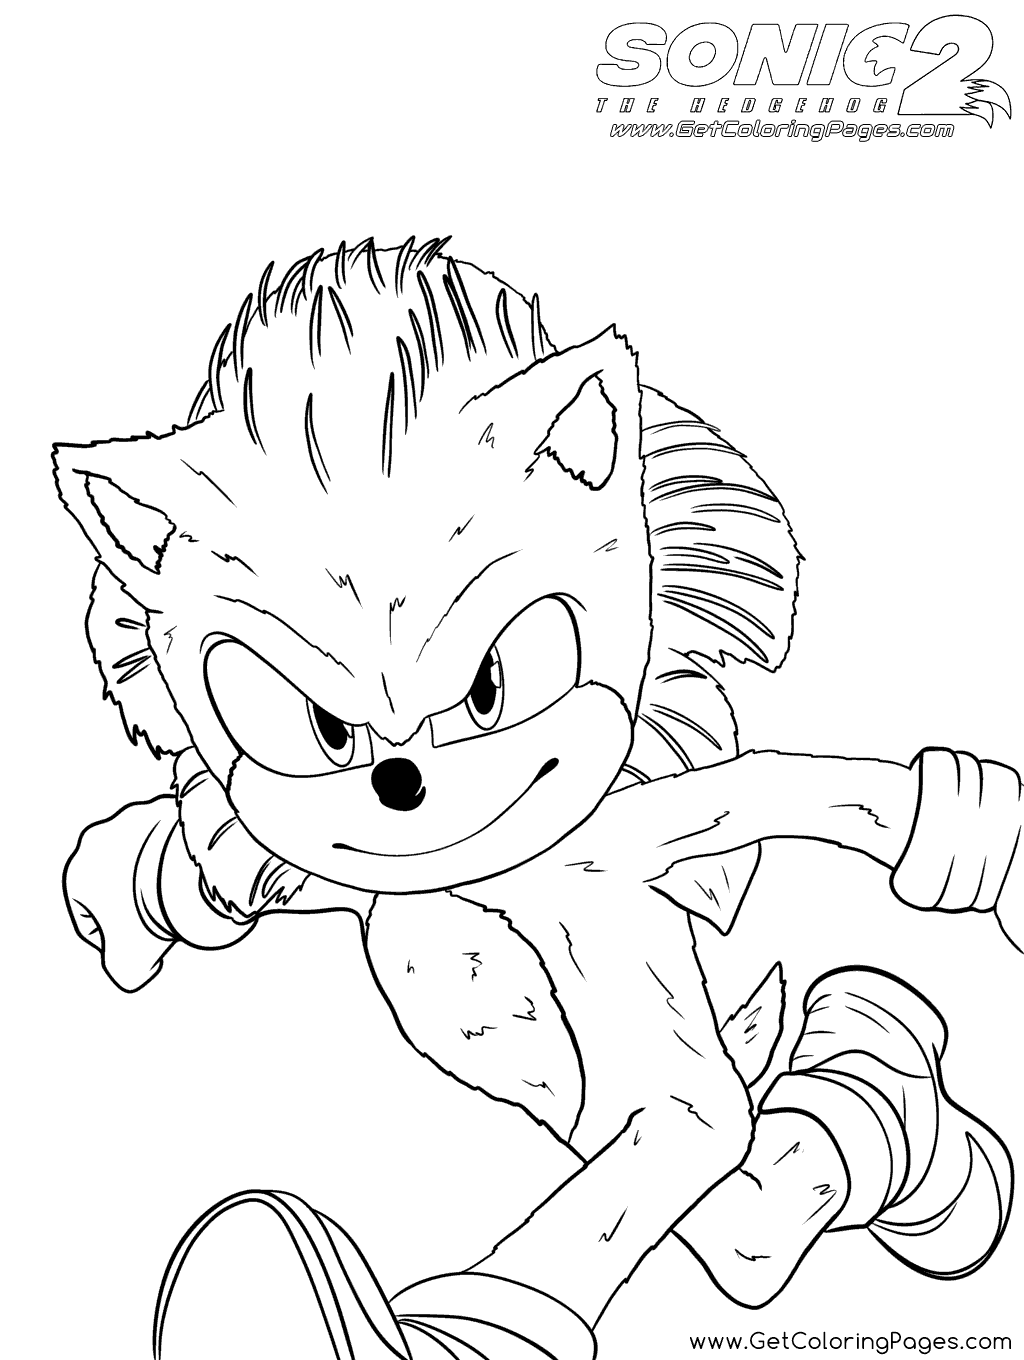 Sonic The Hedgehog Coloring Beautiful Sonic Coloring Pages  Super coloring  pages, Pokemon coloring pages, Hedgehog colors